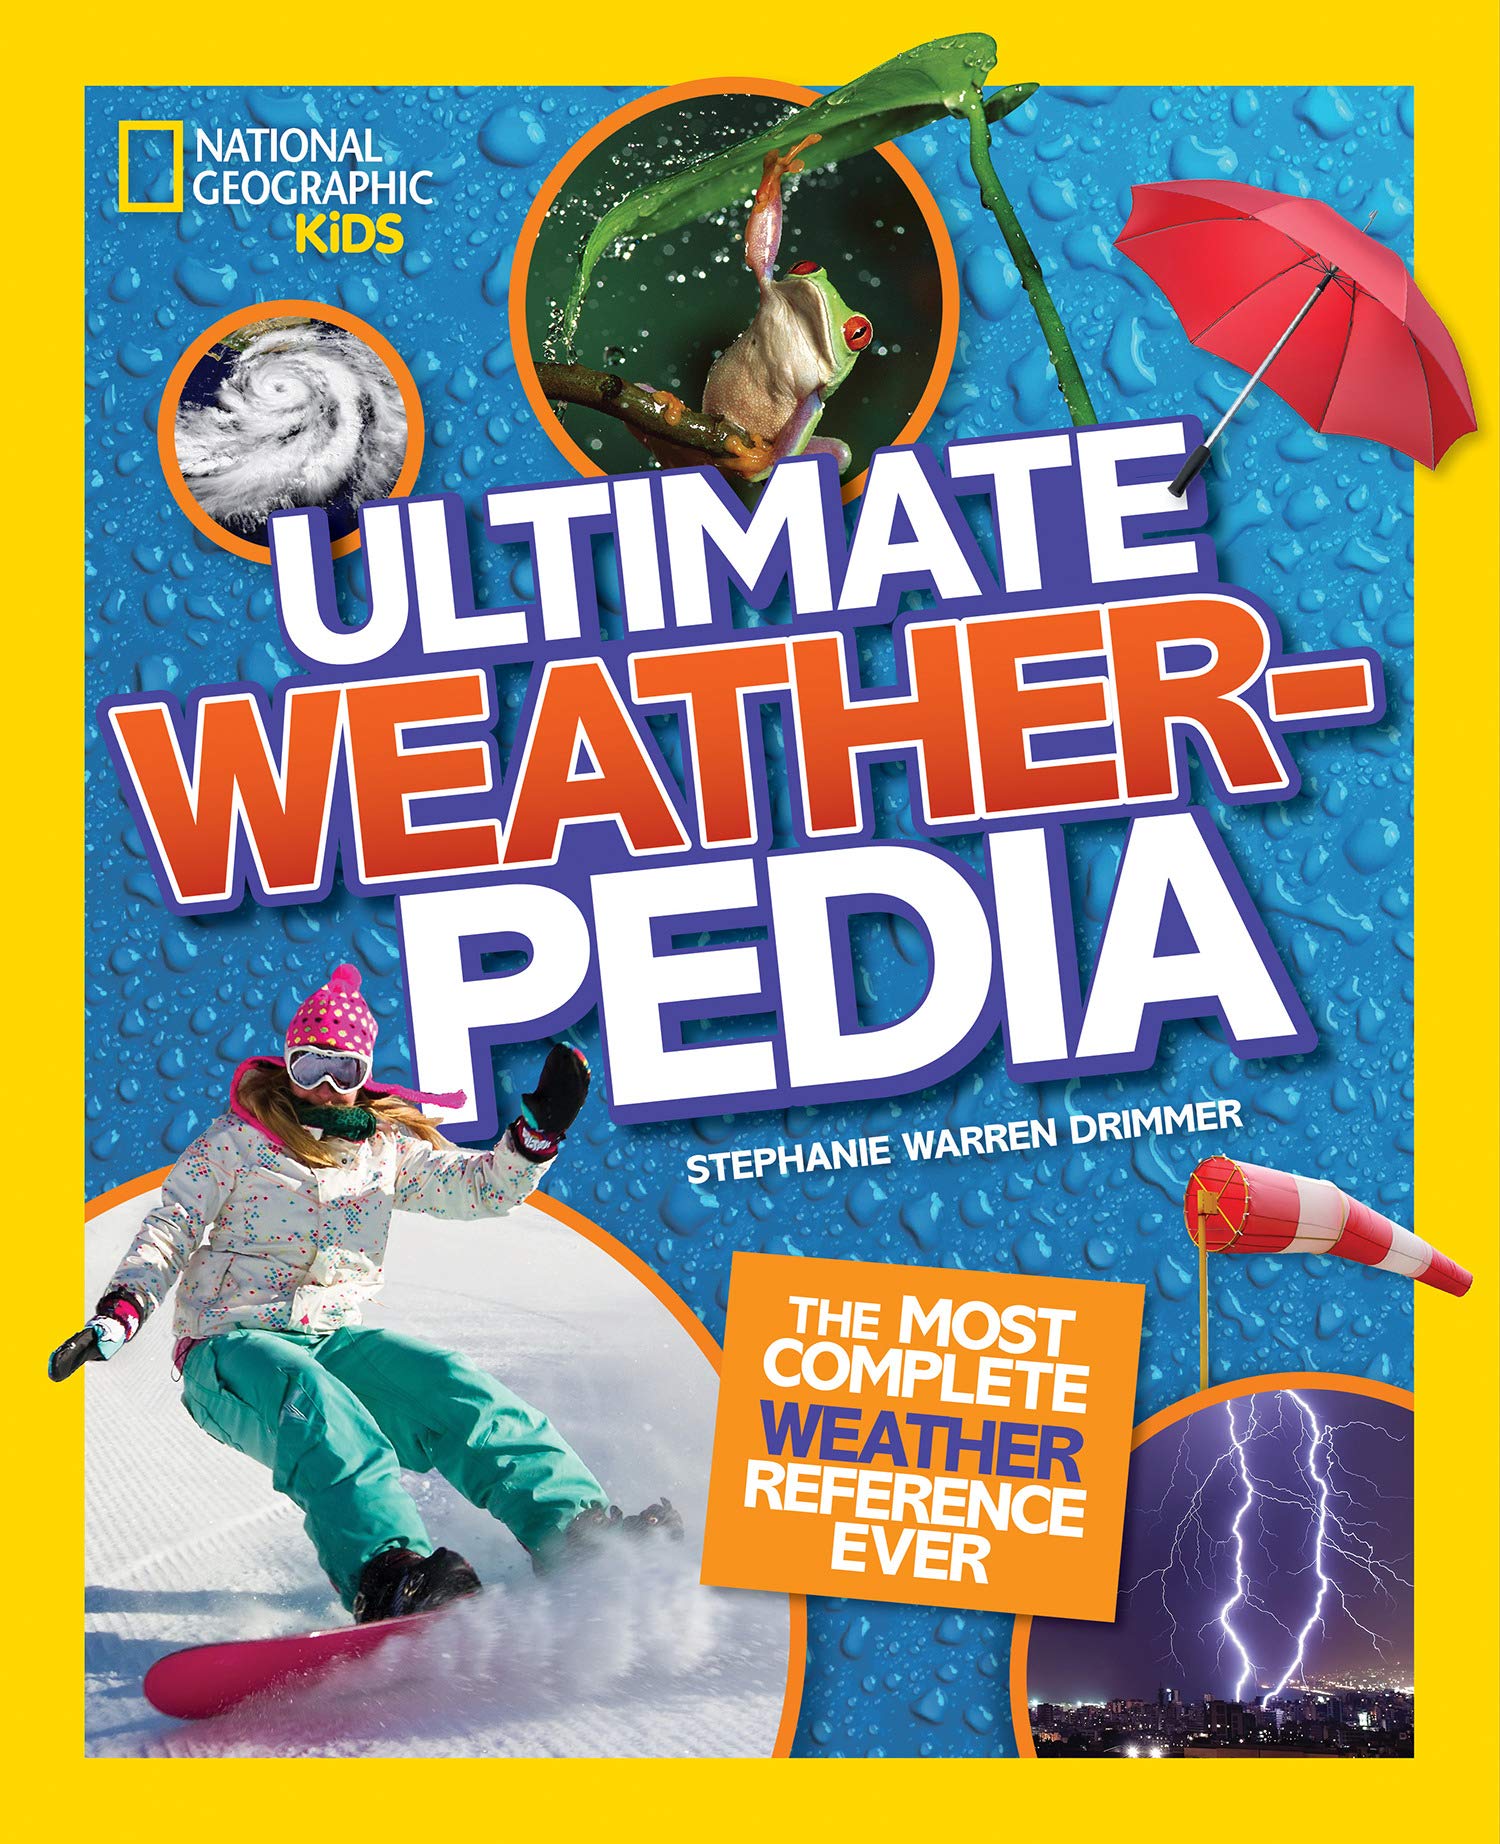 81gzDsoeVyL - National Geographic Kids Ultimate Weatherpedia: The most complete weather reference ever